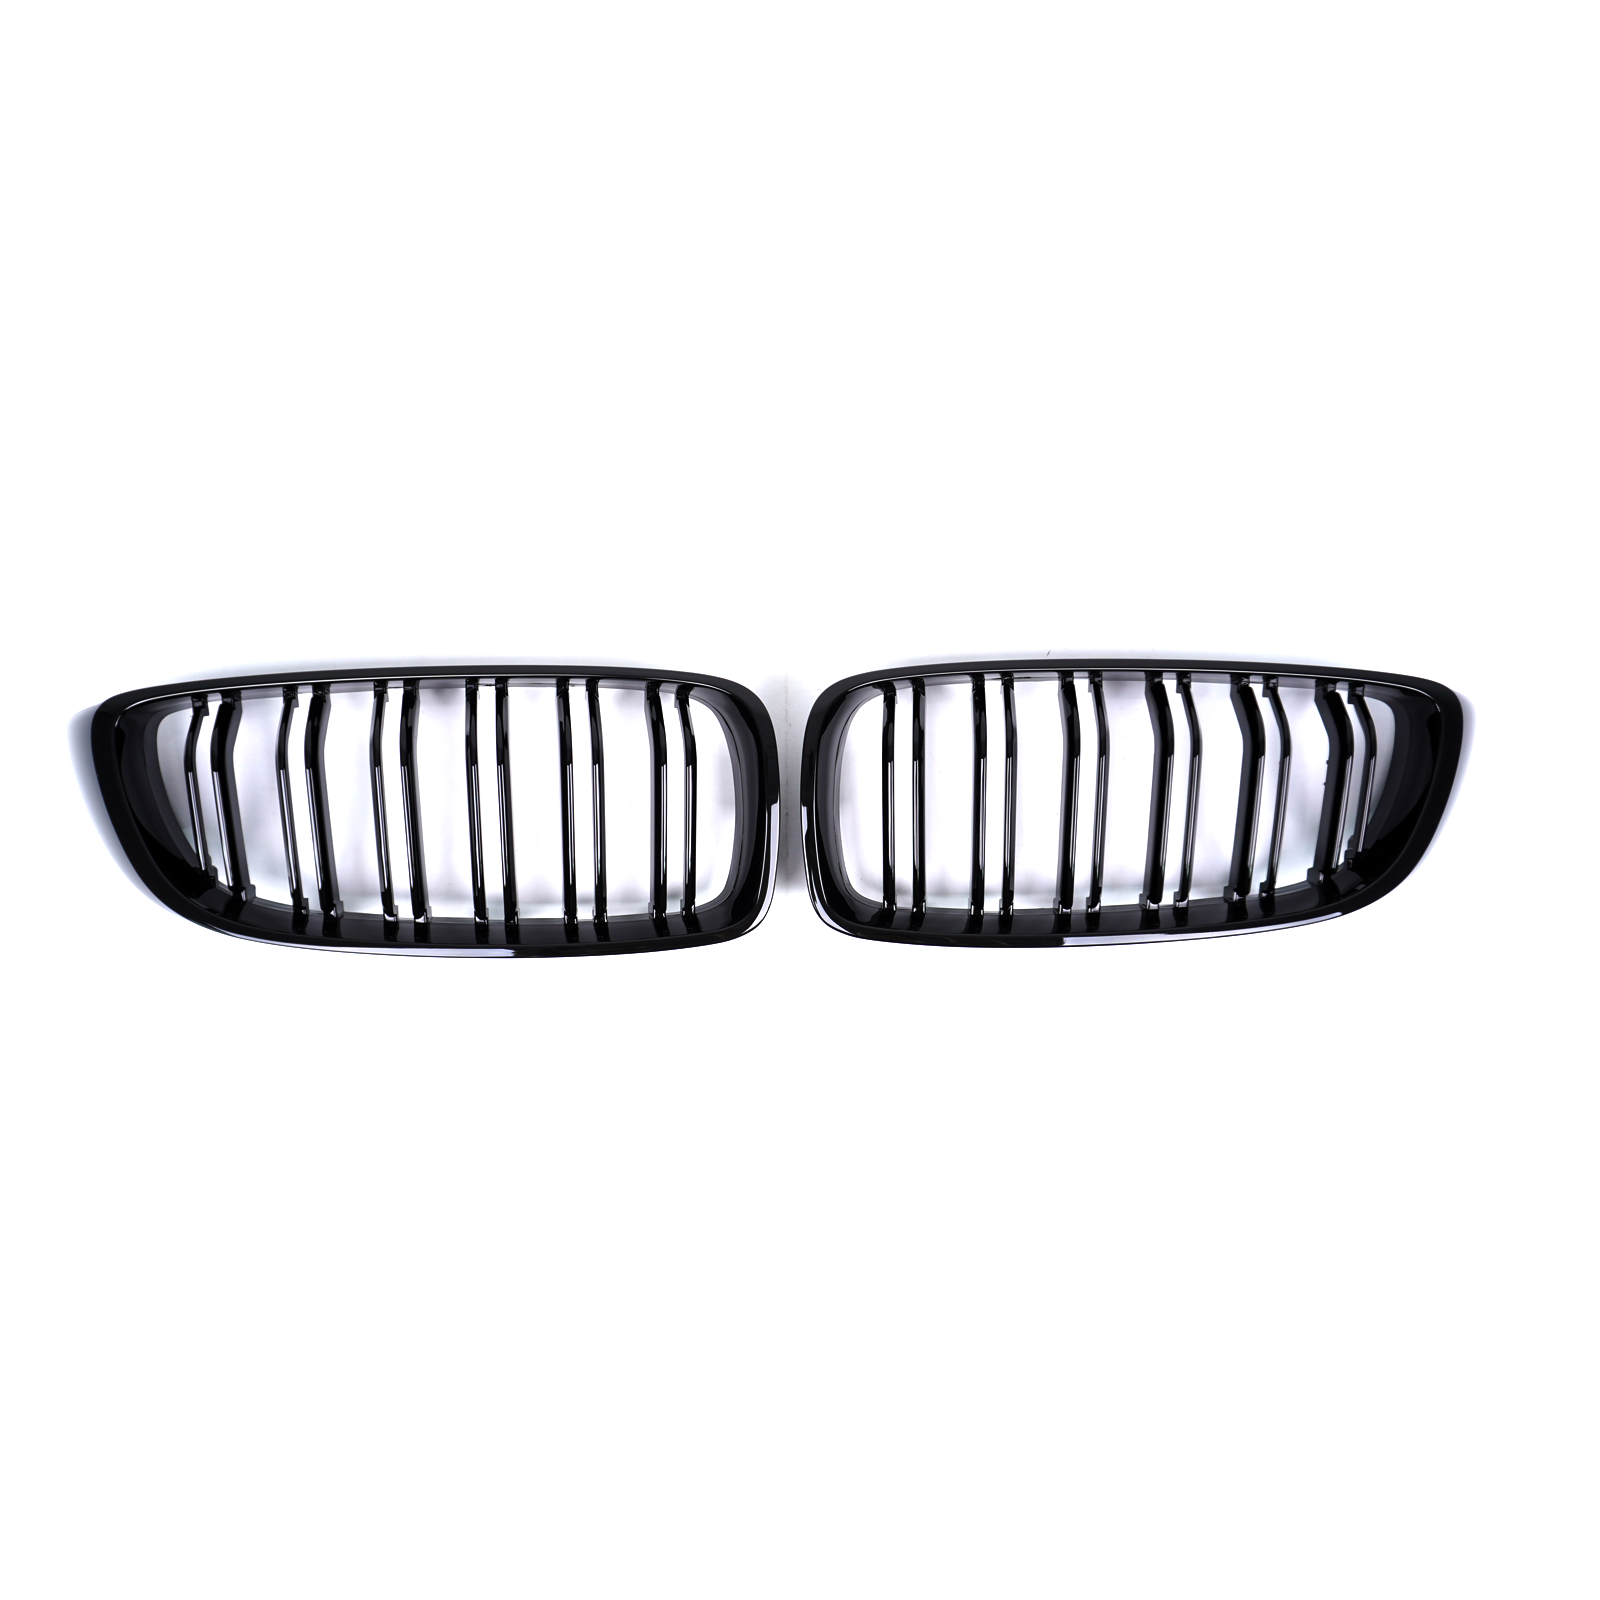 BMW 4 Series F32 F33 F36 F80 F82 Front Grille Gloss Black - ABS Plastic - High-quality Materials - GBT Autostyling